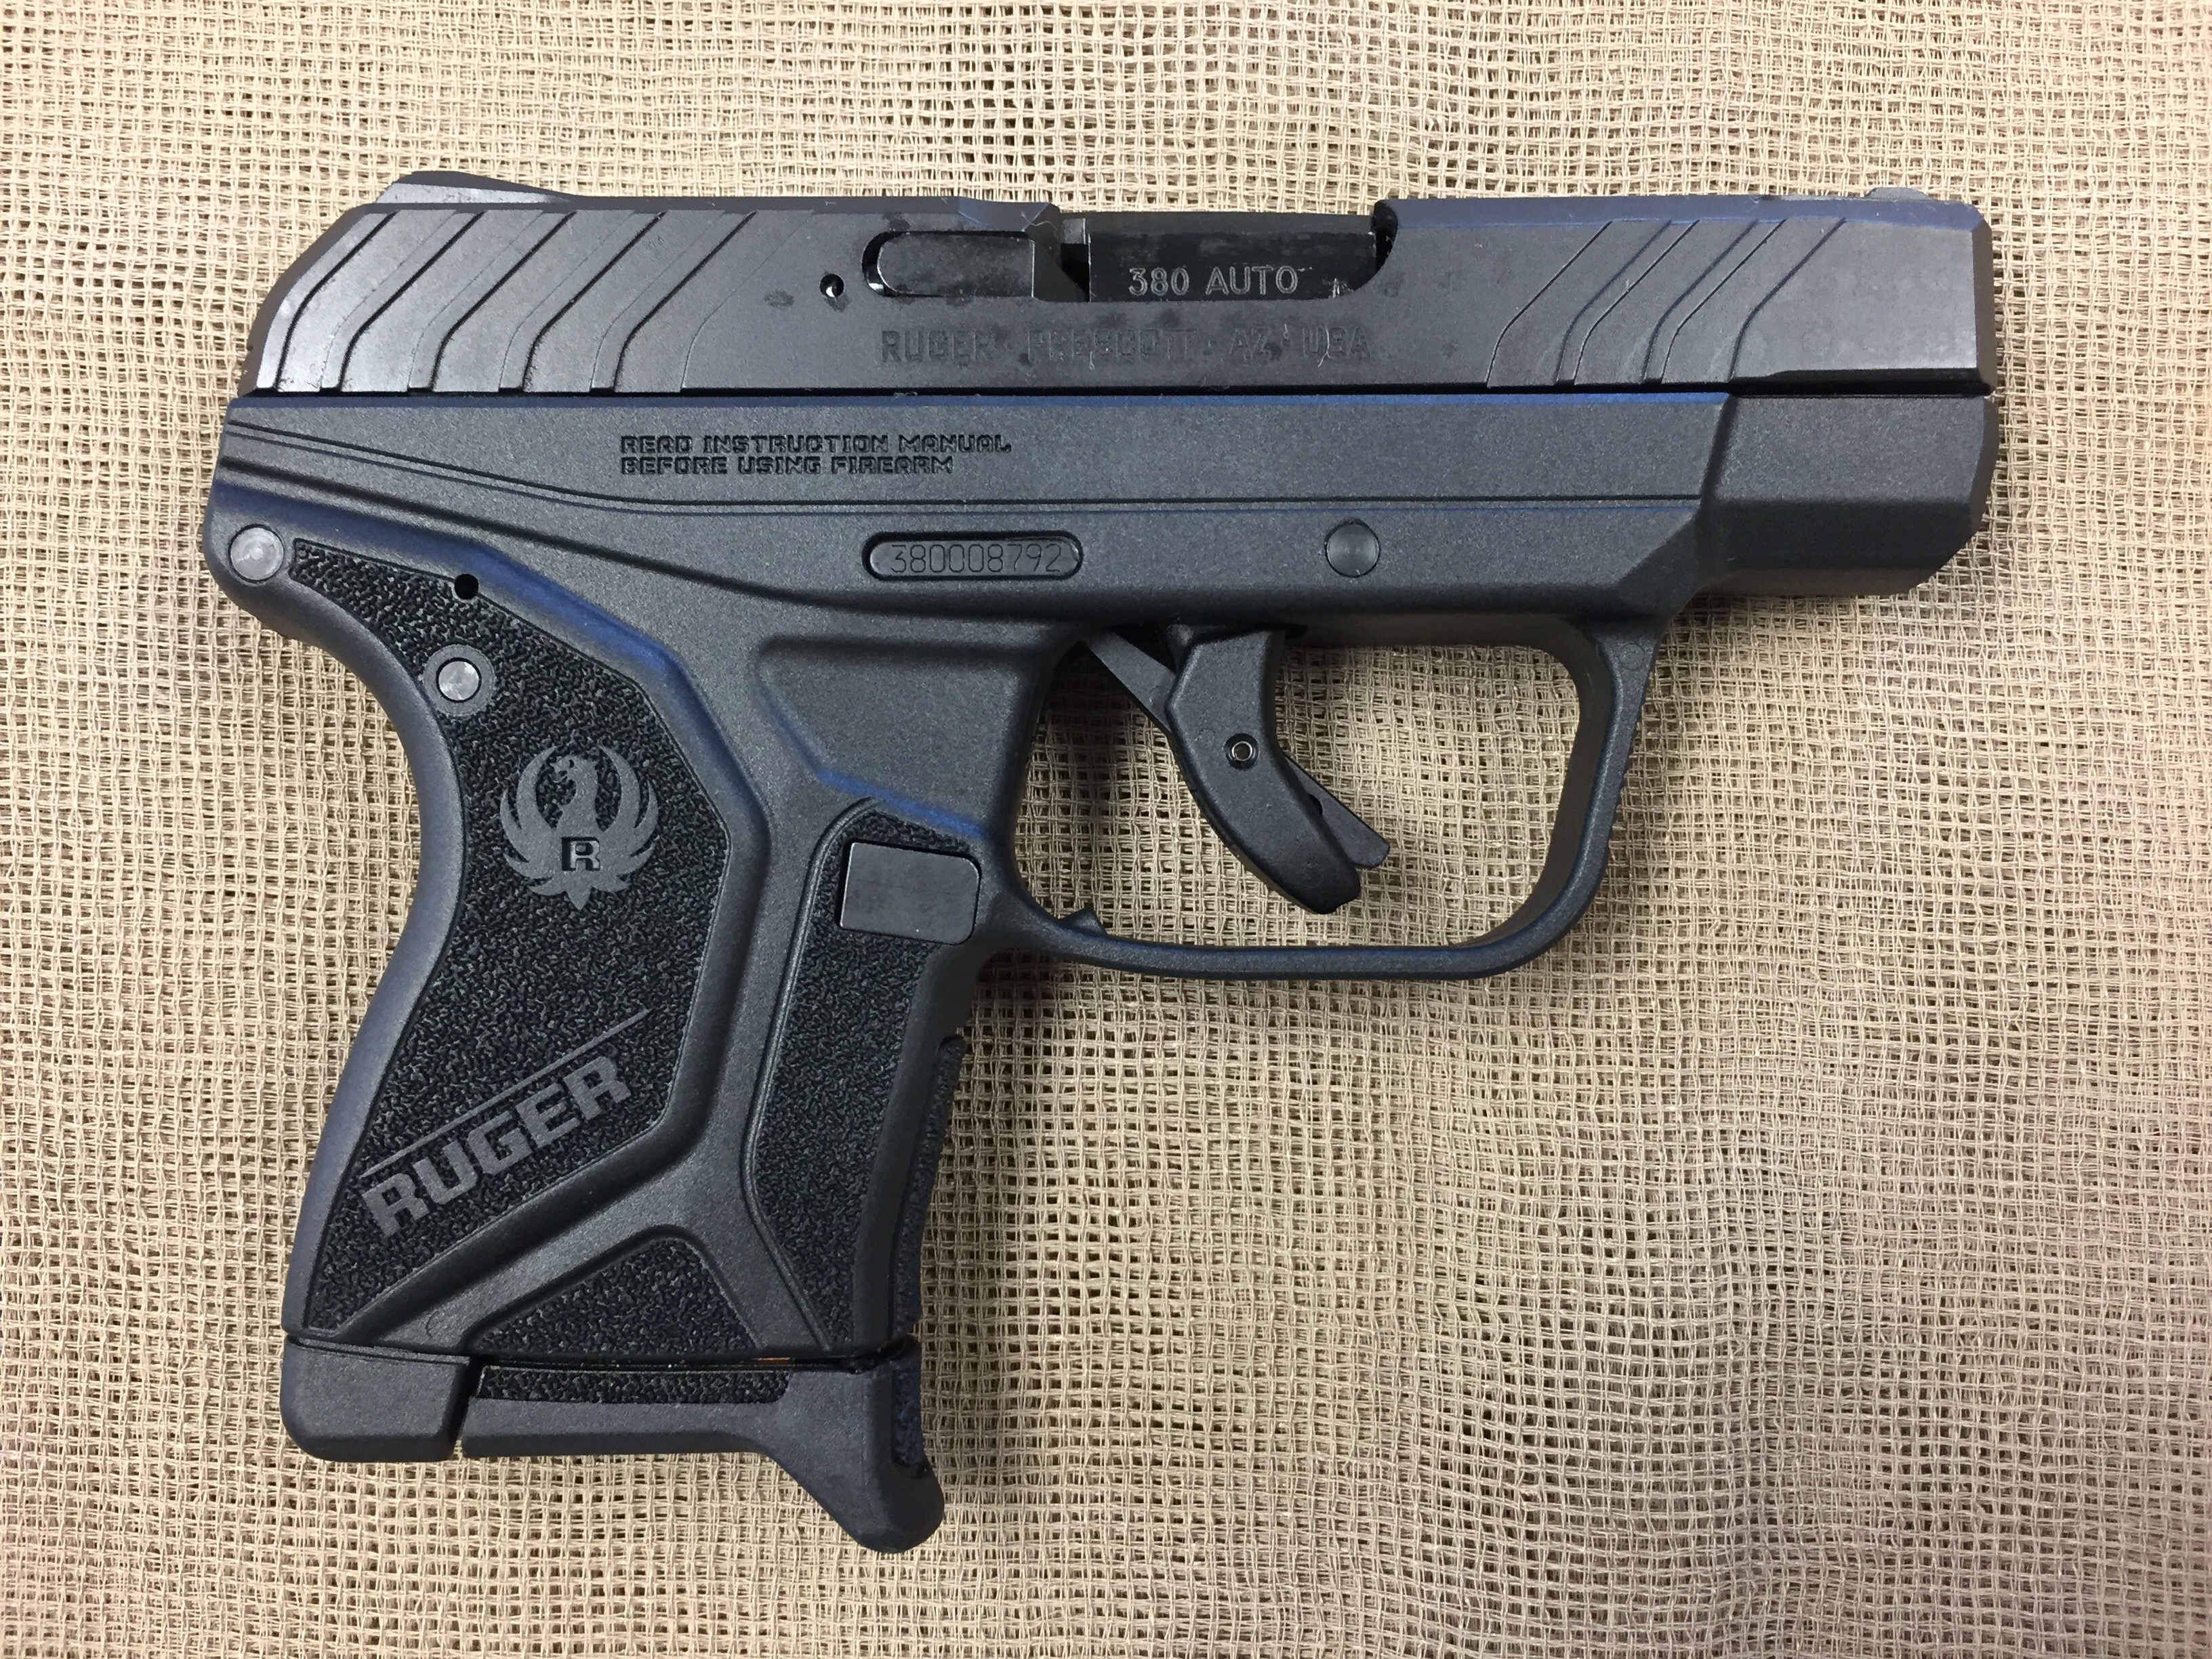 Ruger Lcp Ii 380 Compact Sub P9 Springfield.